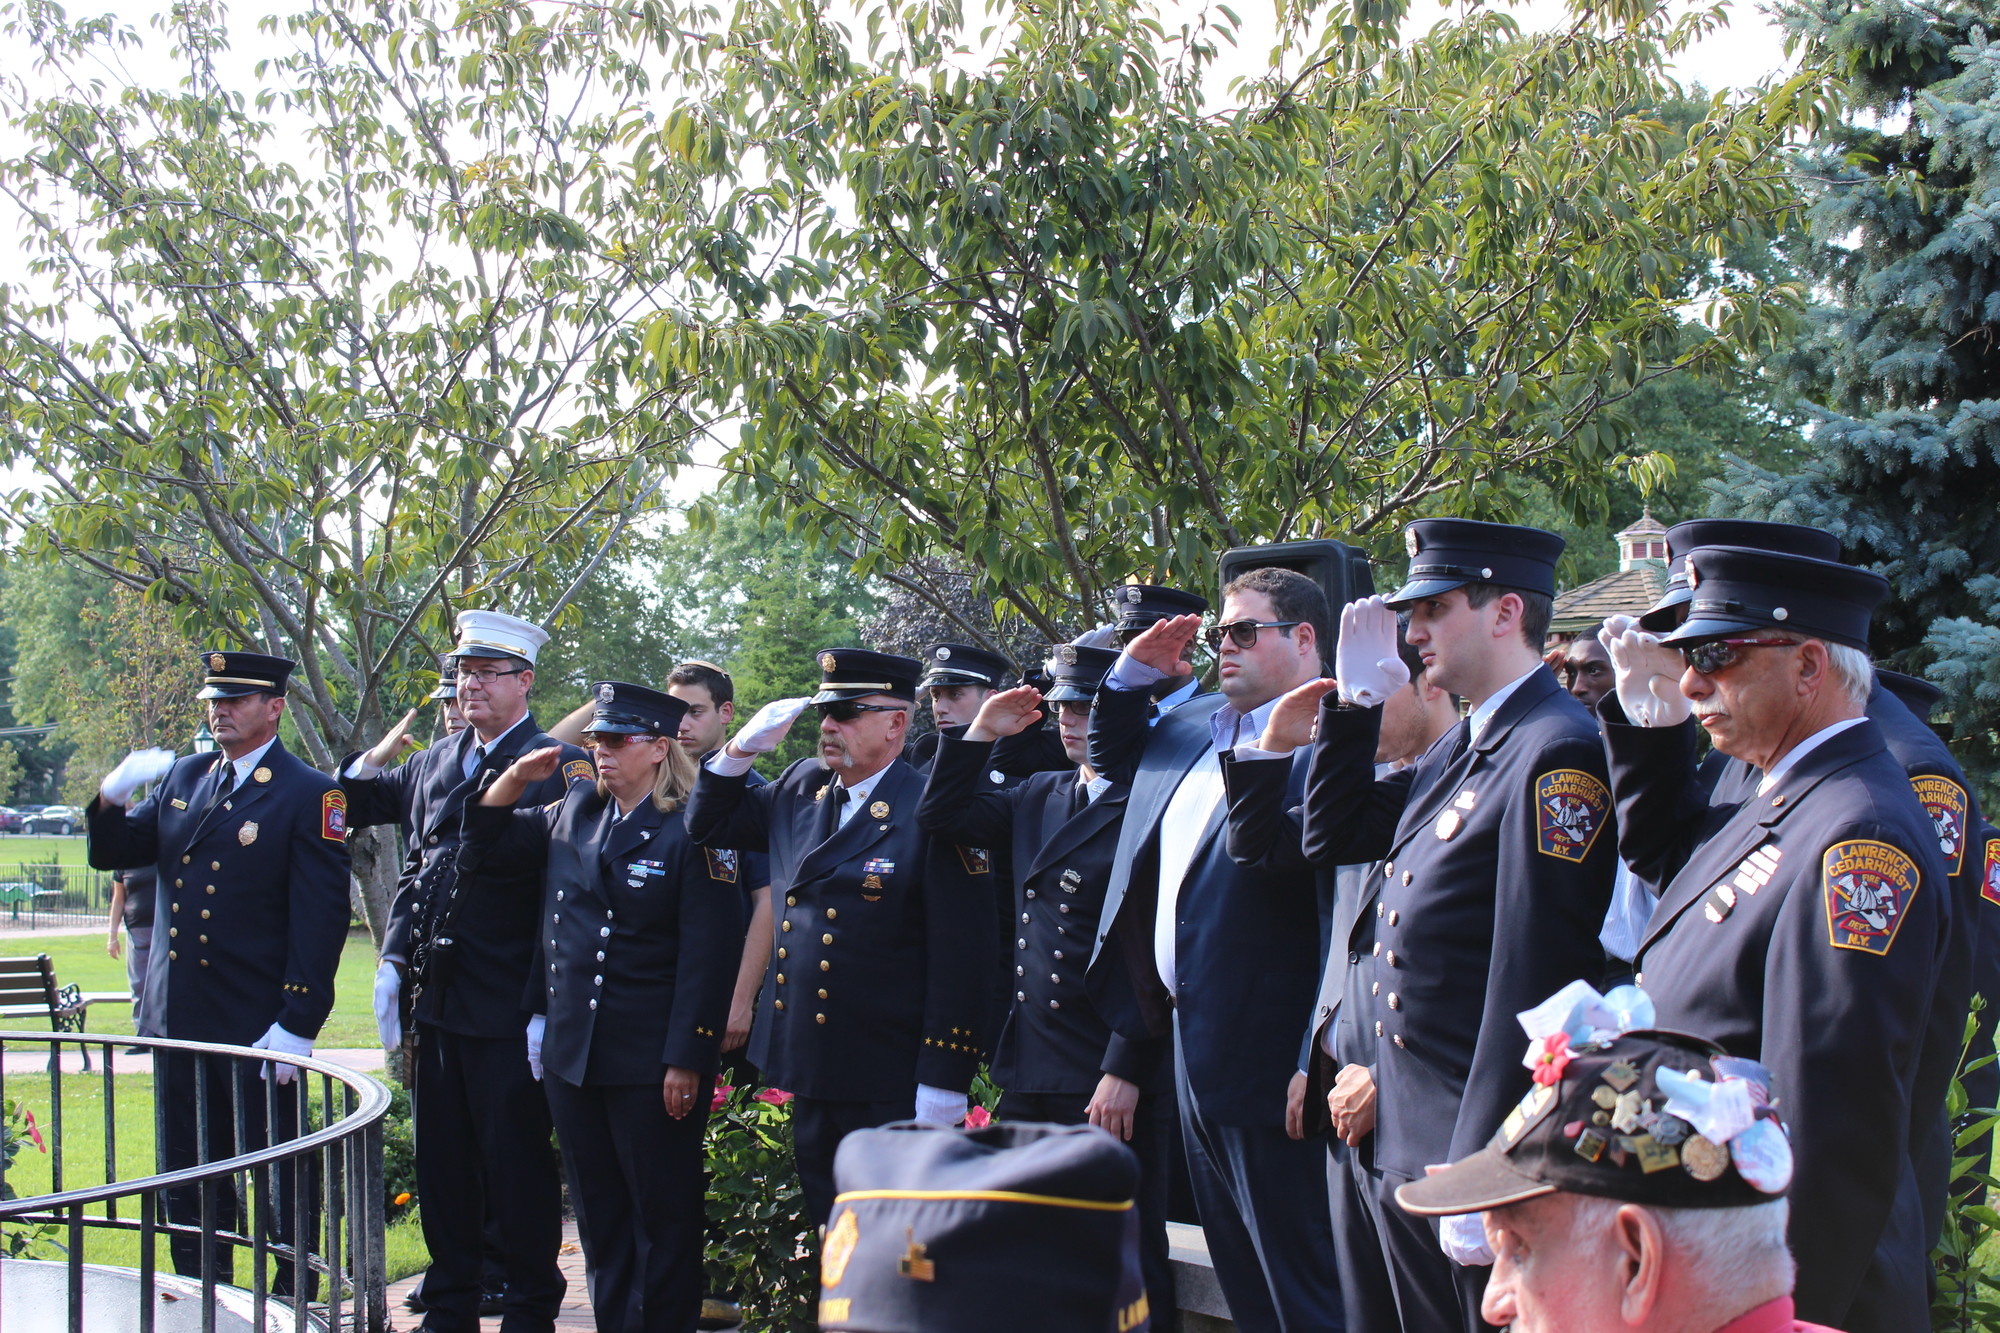 The Lawrence-Cedarhurst Fire Department raised their right hands to salute those who lost their lives on 9/11.